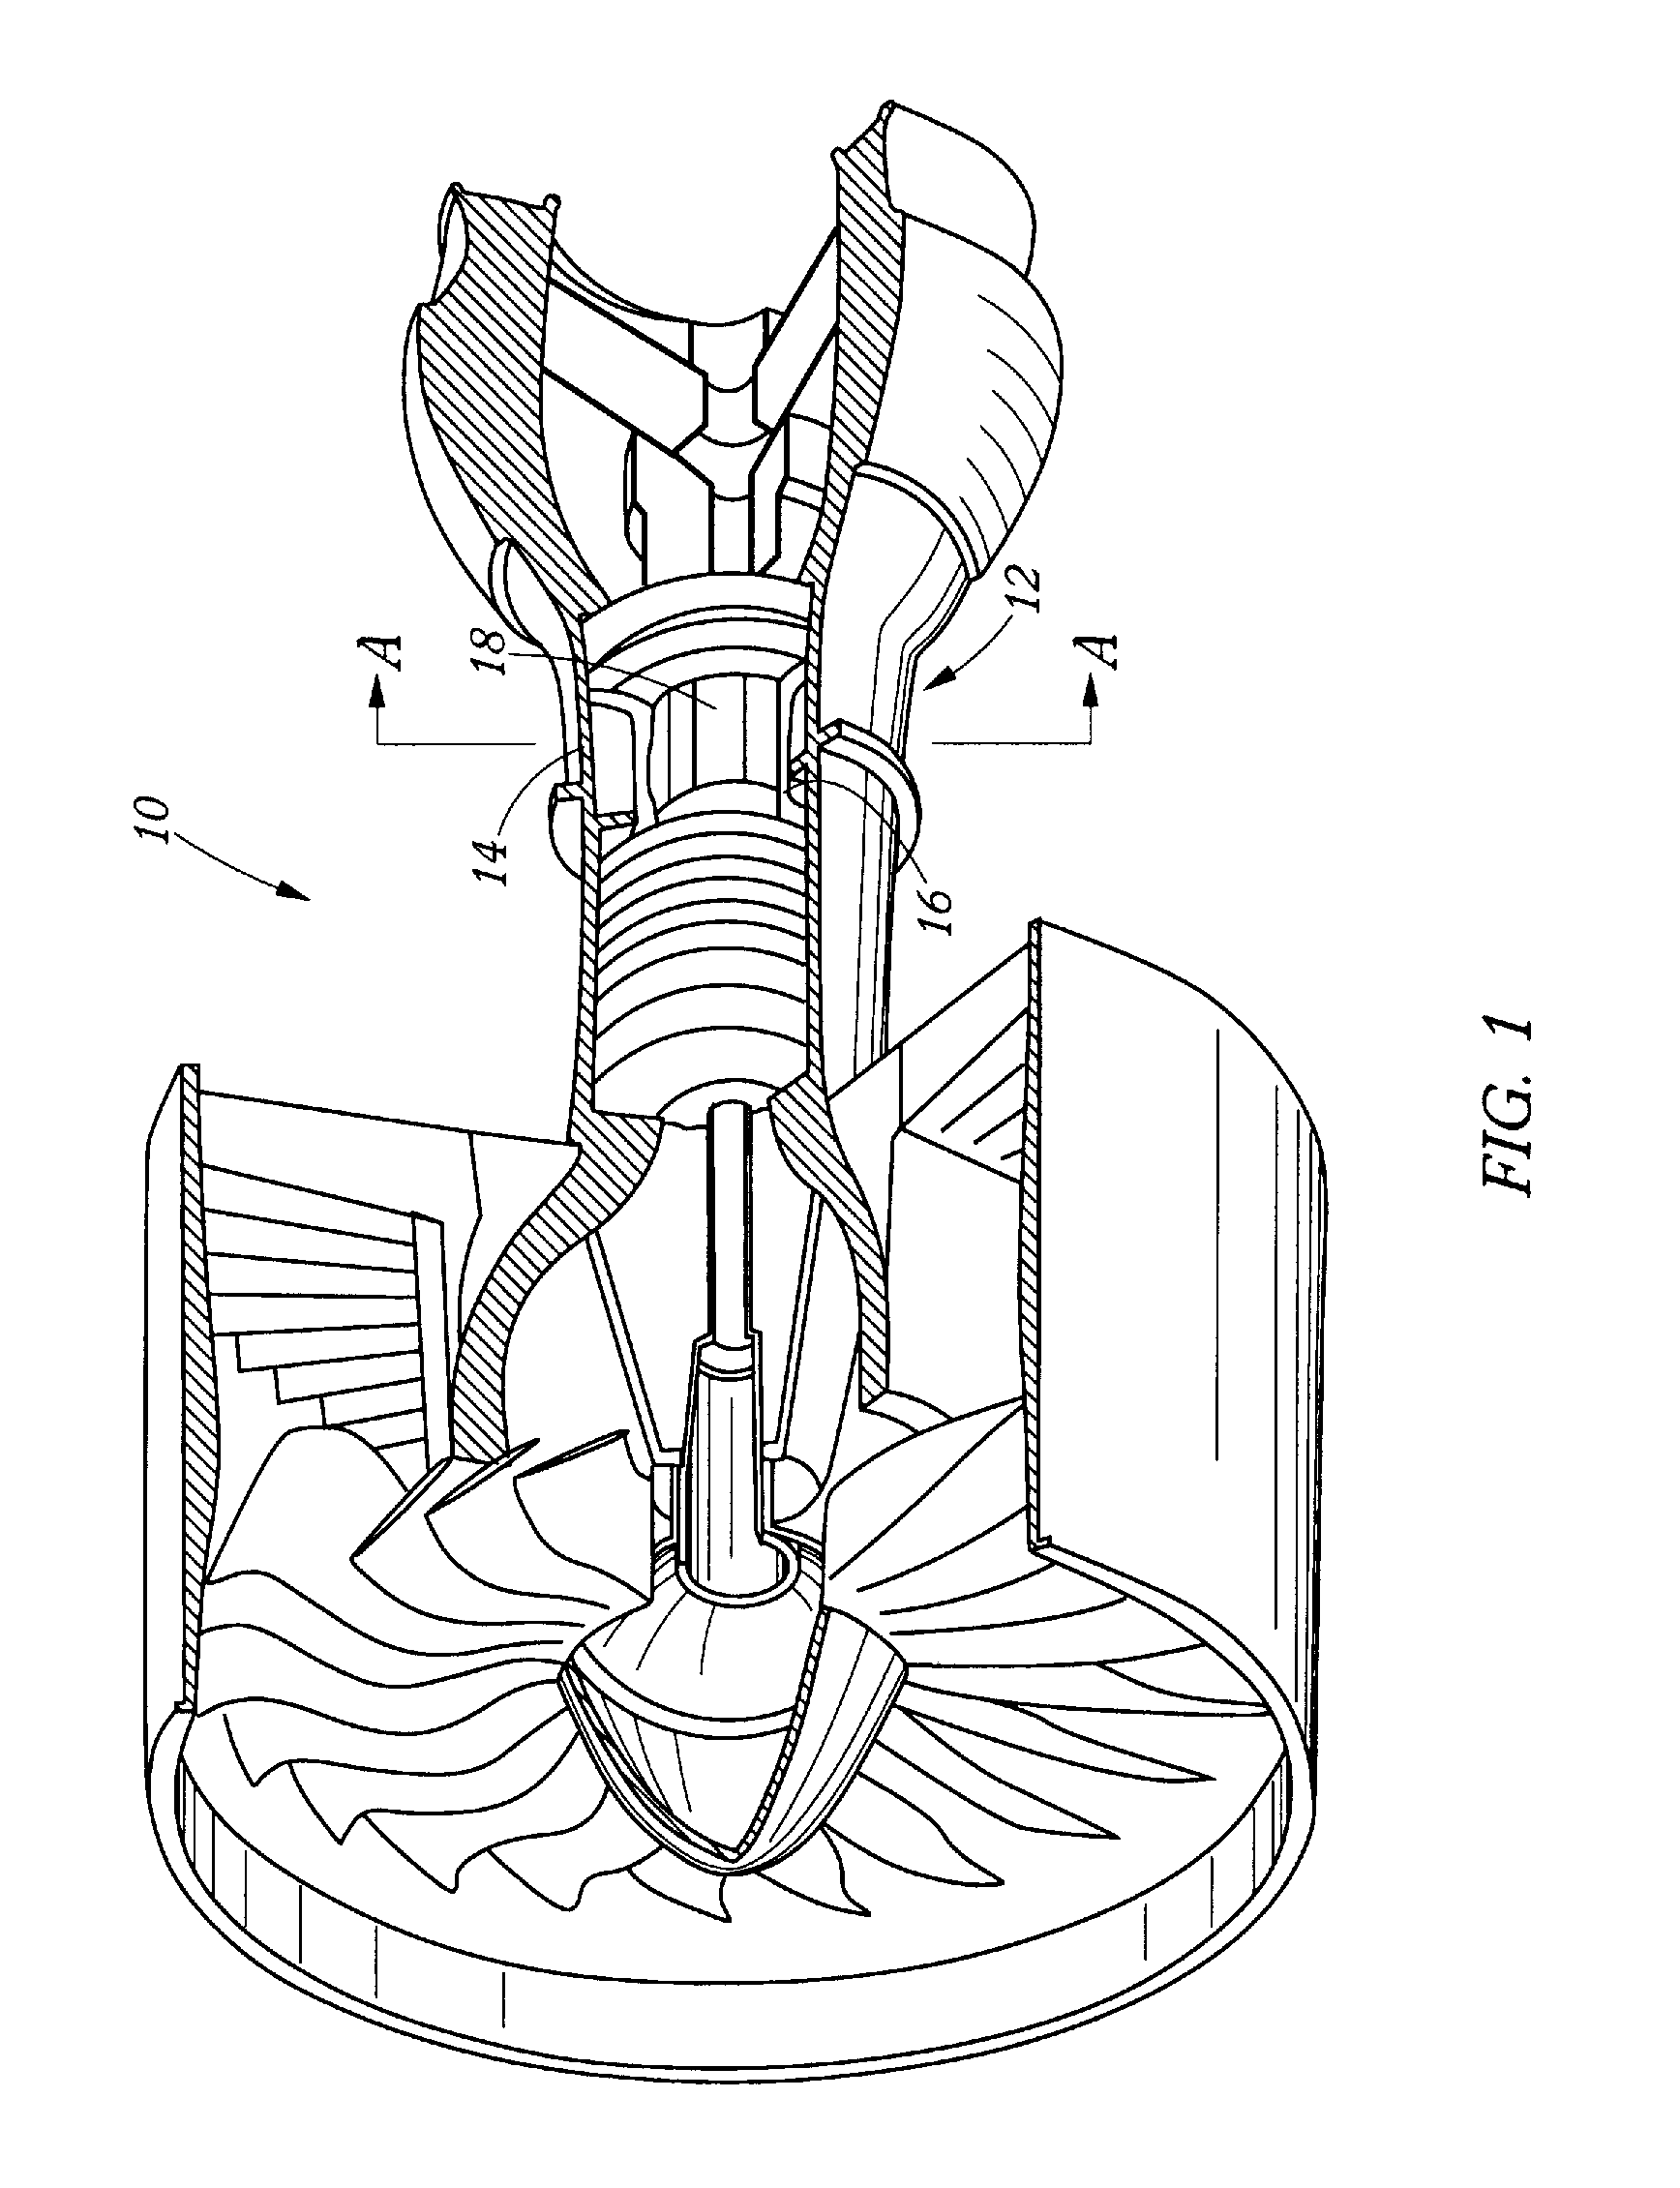 Alignment Free Single-Ended Optical Probe and Methods for Spectroscopic Measurements in a Gas Turbine Engine